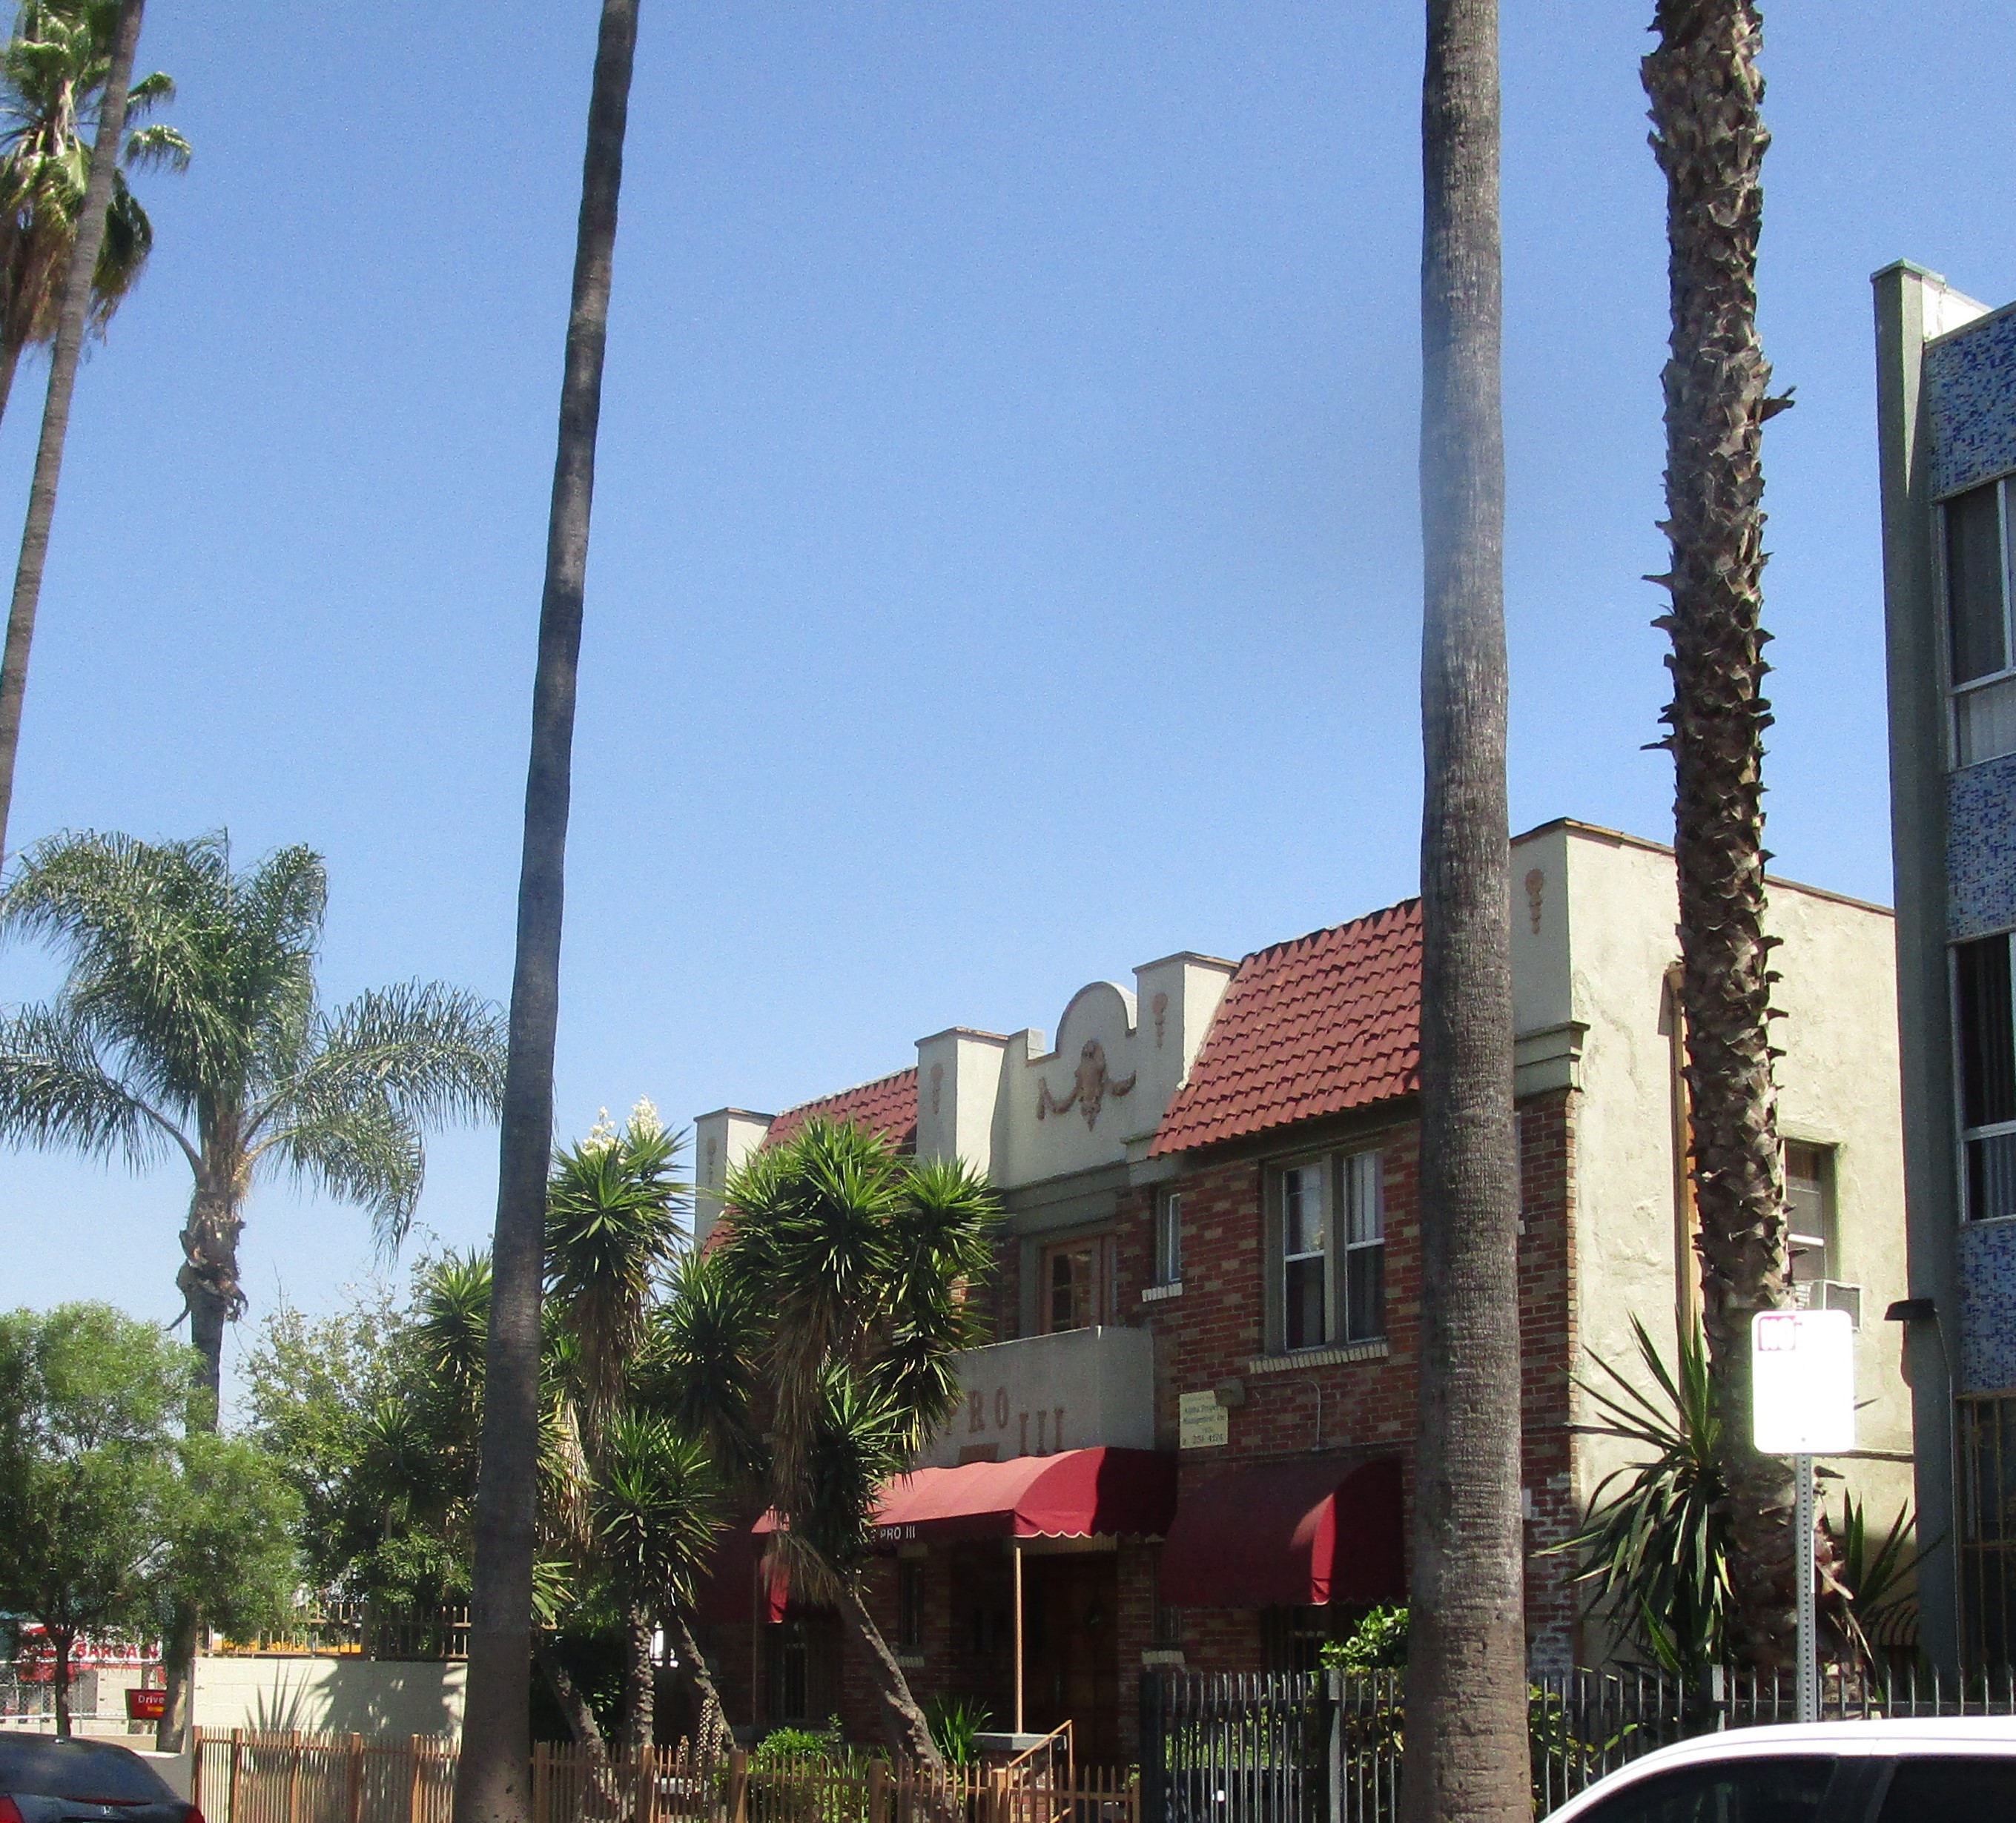 two story beige and brcik color building, one top balcony, main entrance with a burgundy canopy tent, bottom windows on each side with a burgundy canopy tent, Yucca trees right in front of the main entrance, gated, palm trees and other bushes, parked cars